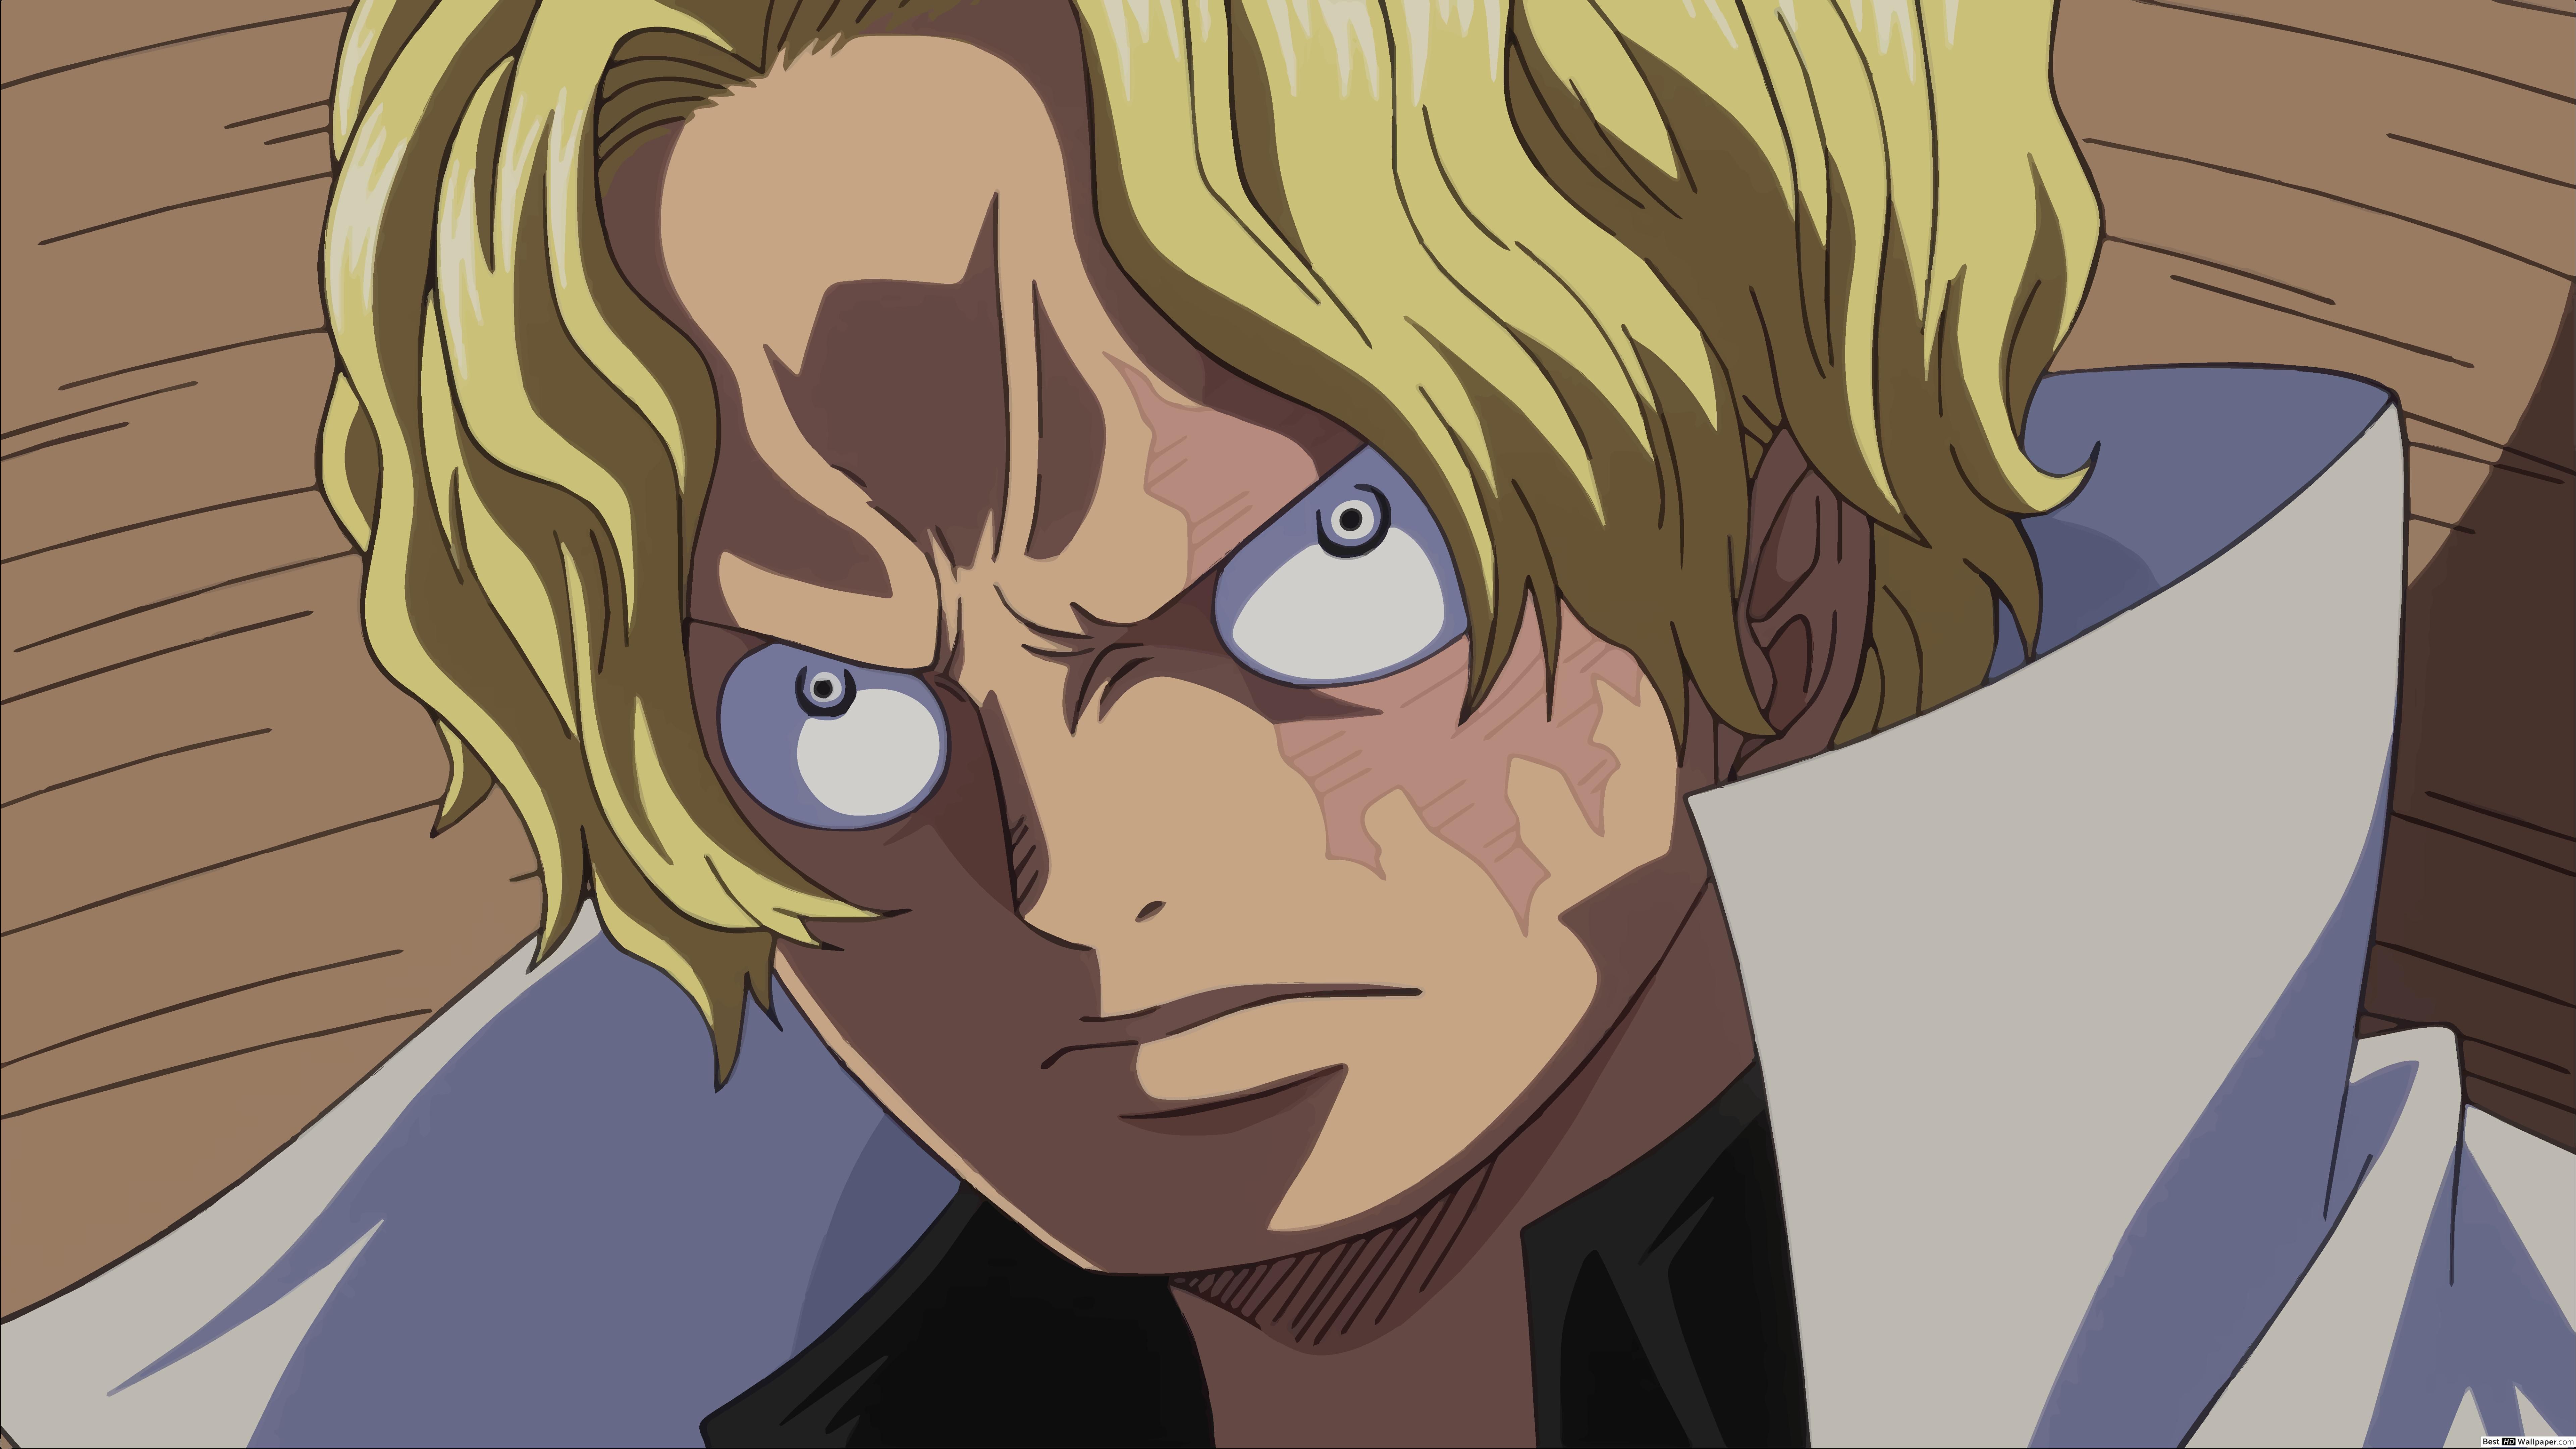 No. 2 of the Revolutionary Army Sabo HD wallpaper download